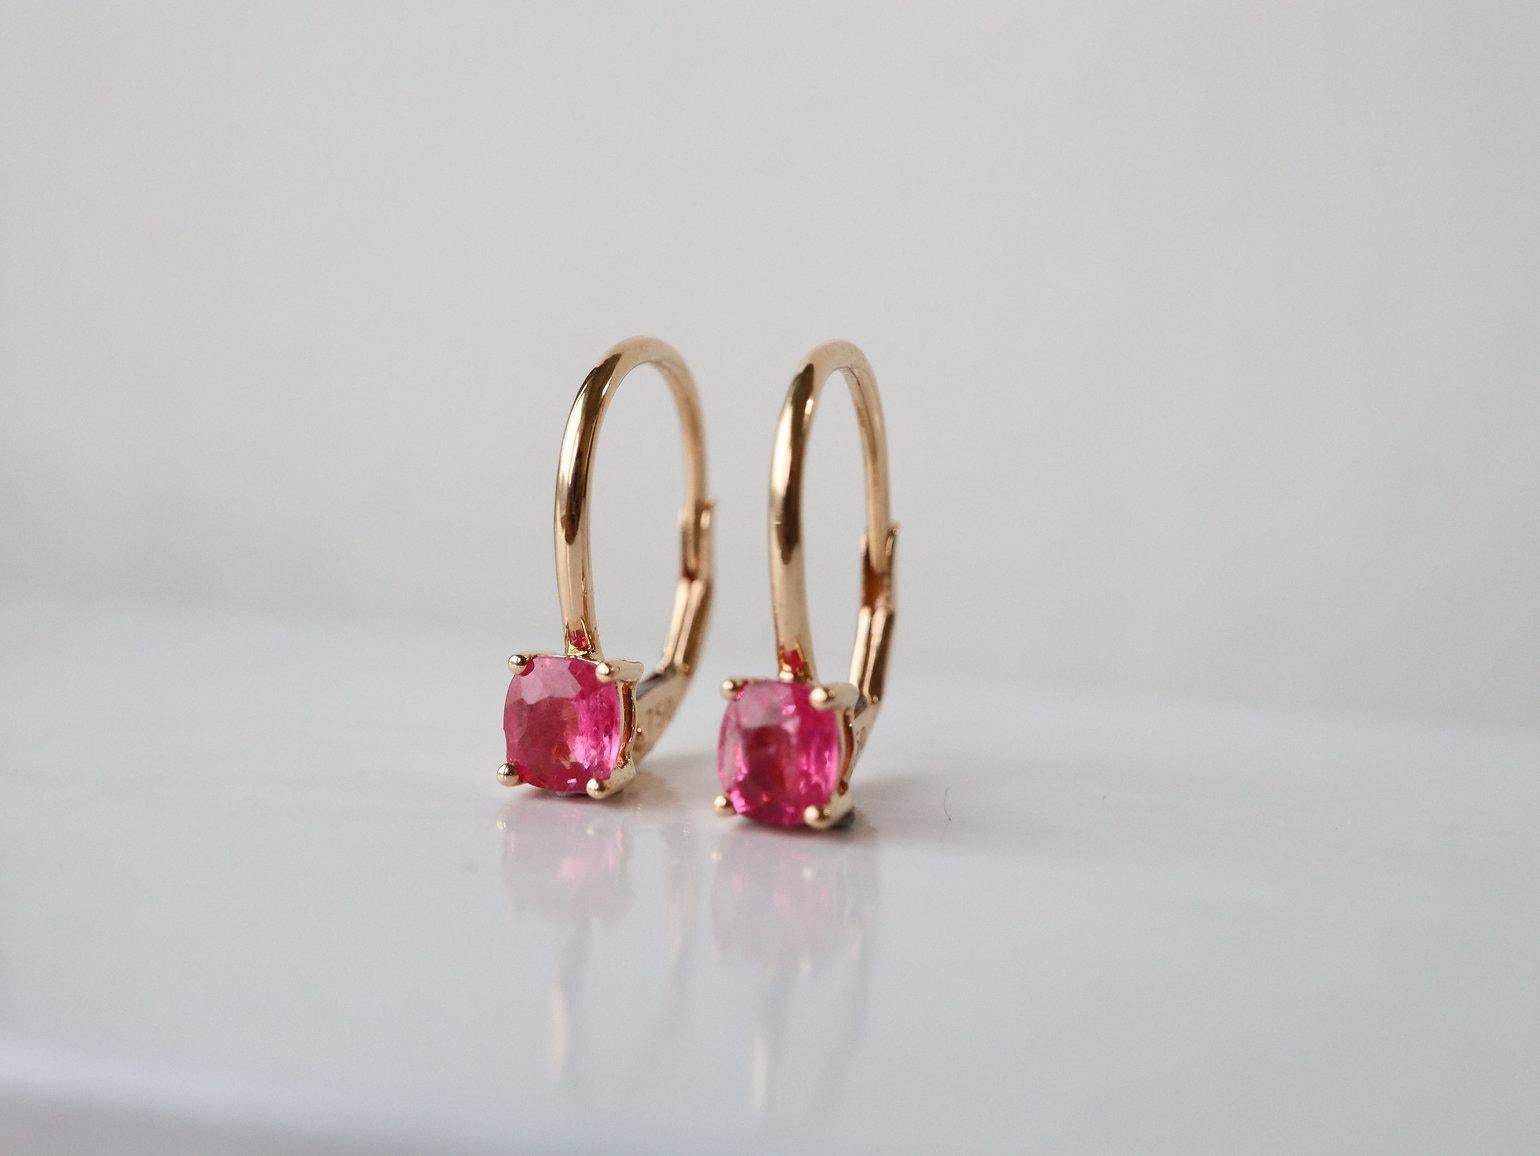 Leverback earrings are versatile and trendy ear jewelry suitable for both casual and formal occasions. Featuring a hinged lever in the closure mechanism, they provide a secure clasp at the back. Set with natural gemstones such as rubies, sapphires,